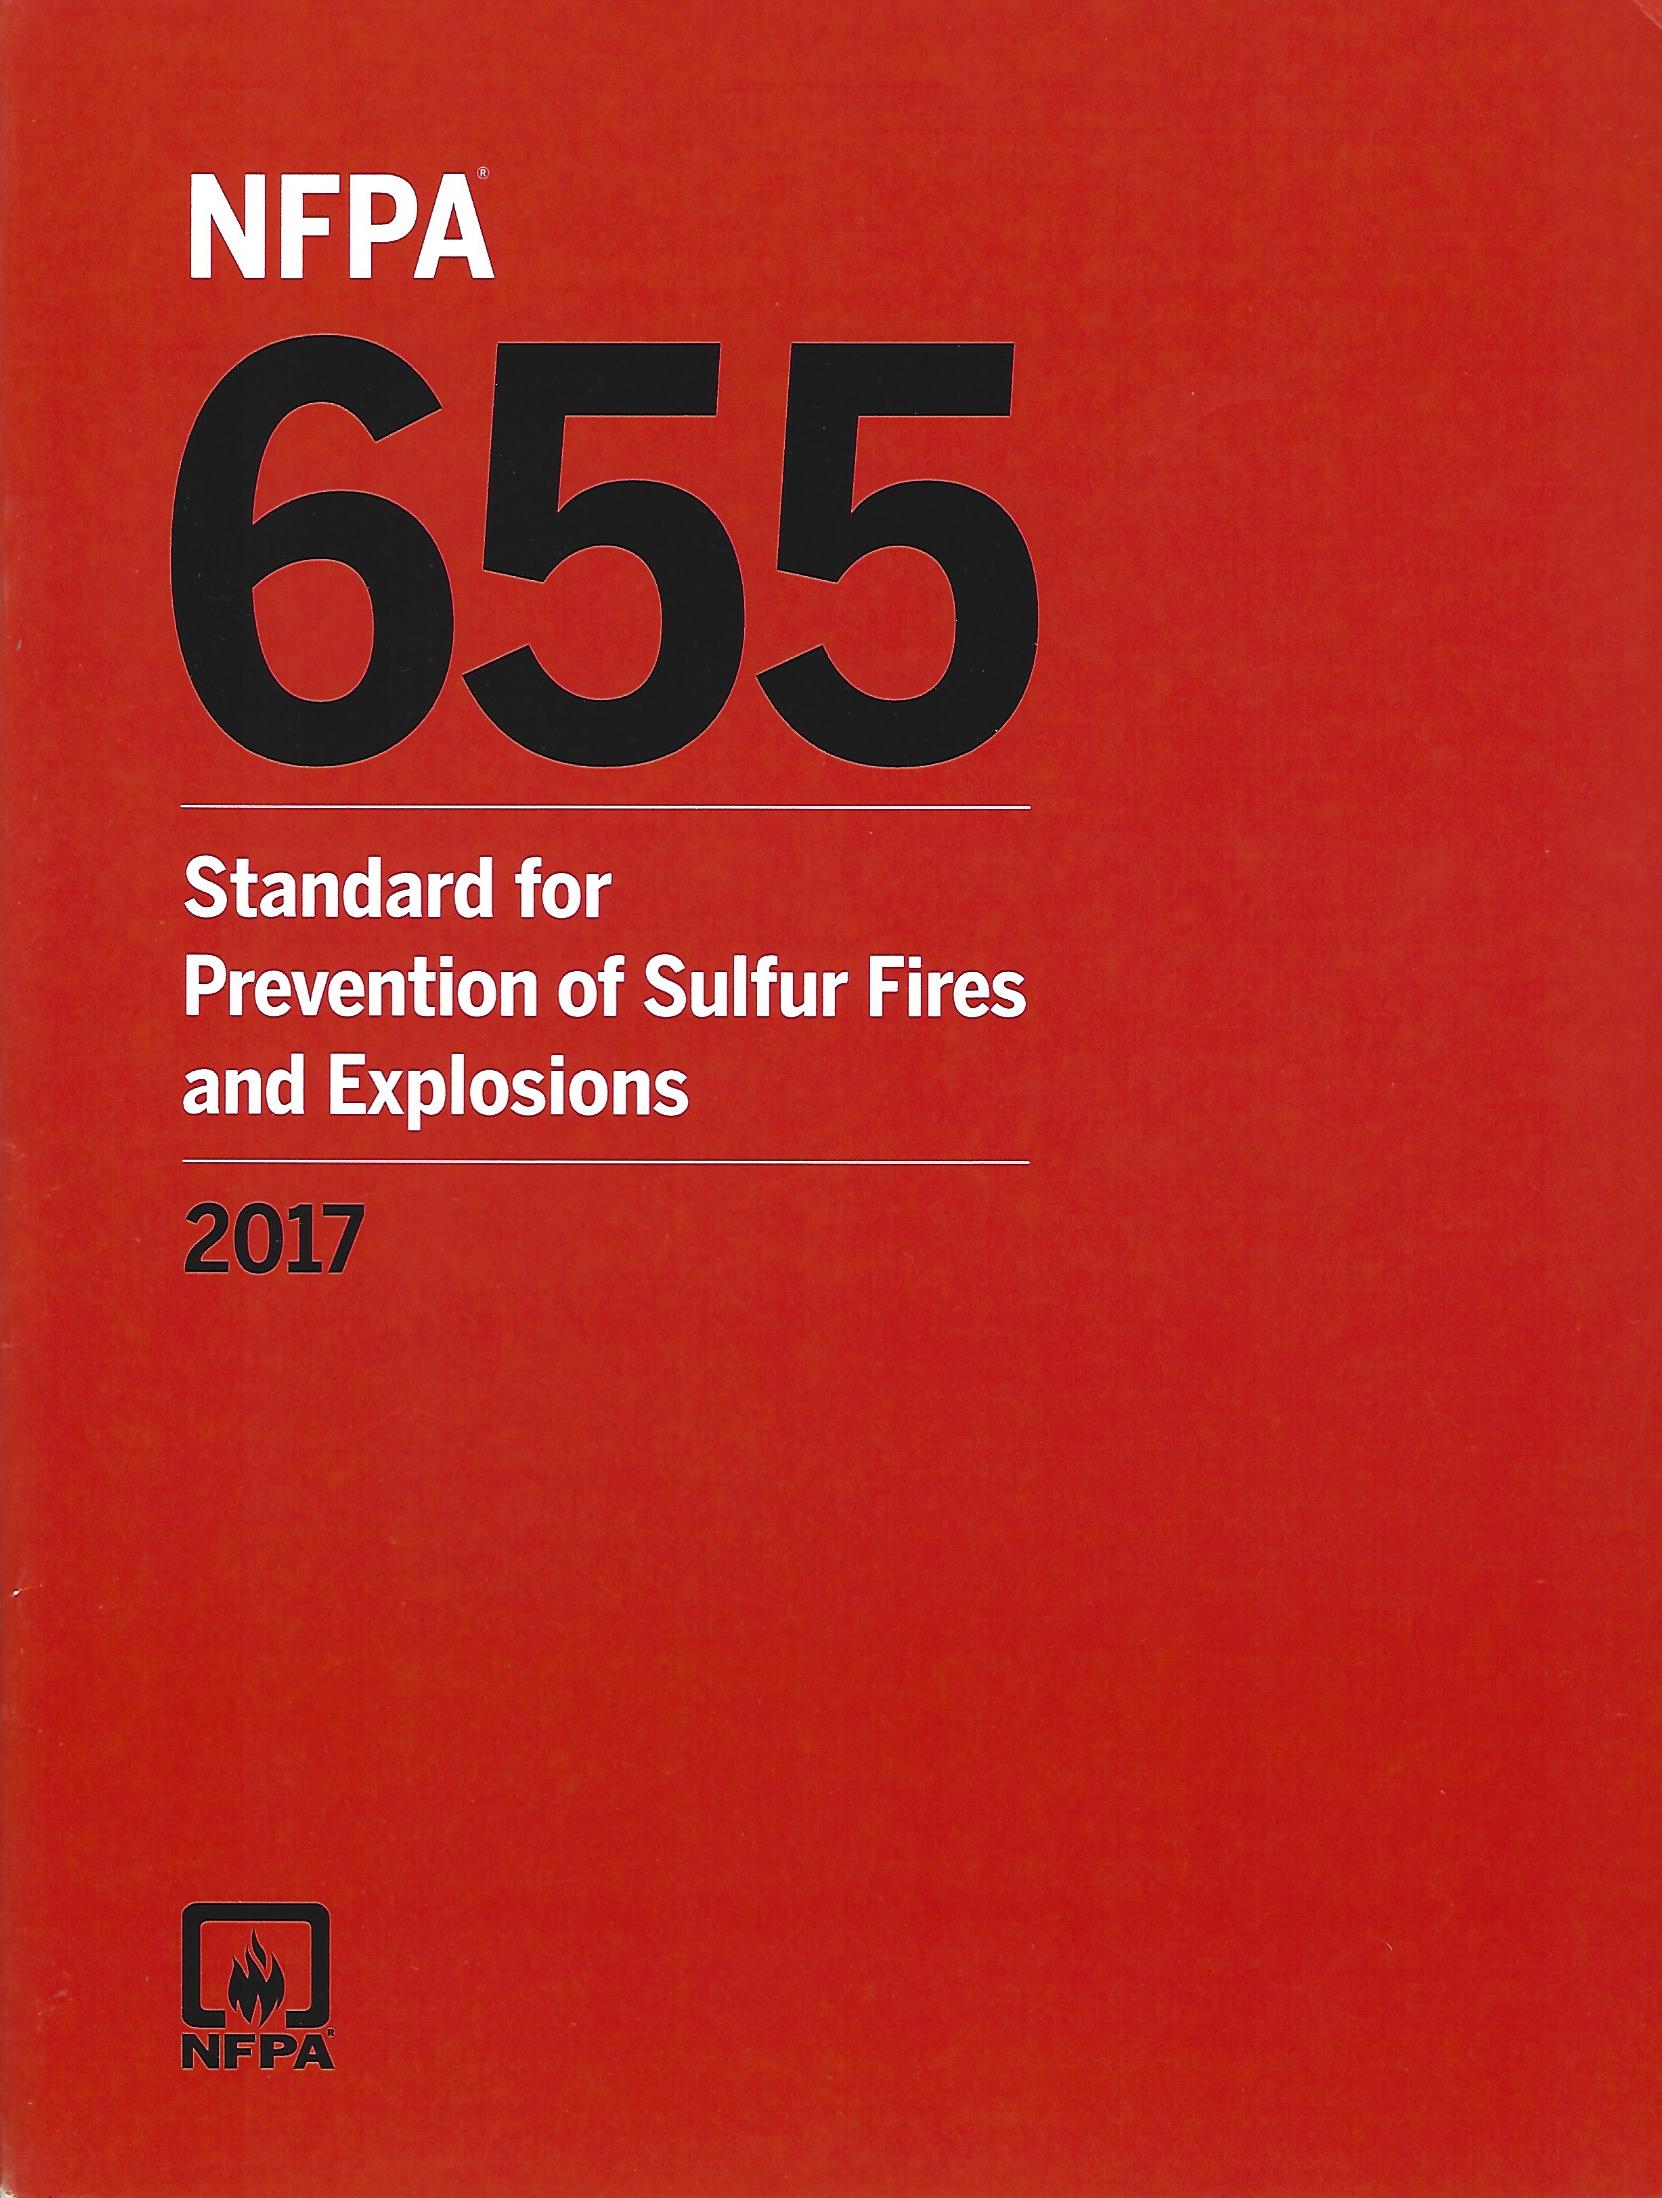 NFPA 655: Standard for Prevention of Sulfur Fires and Explosions